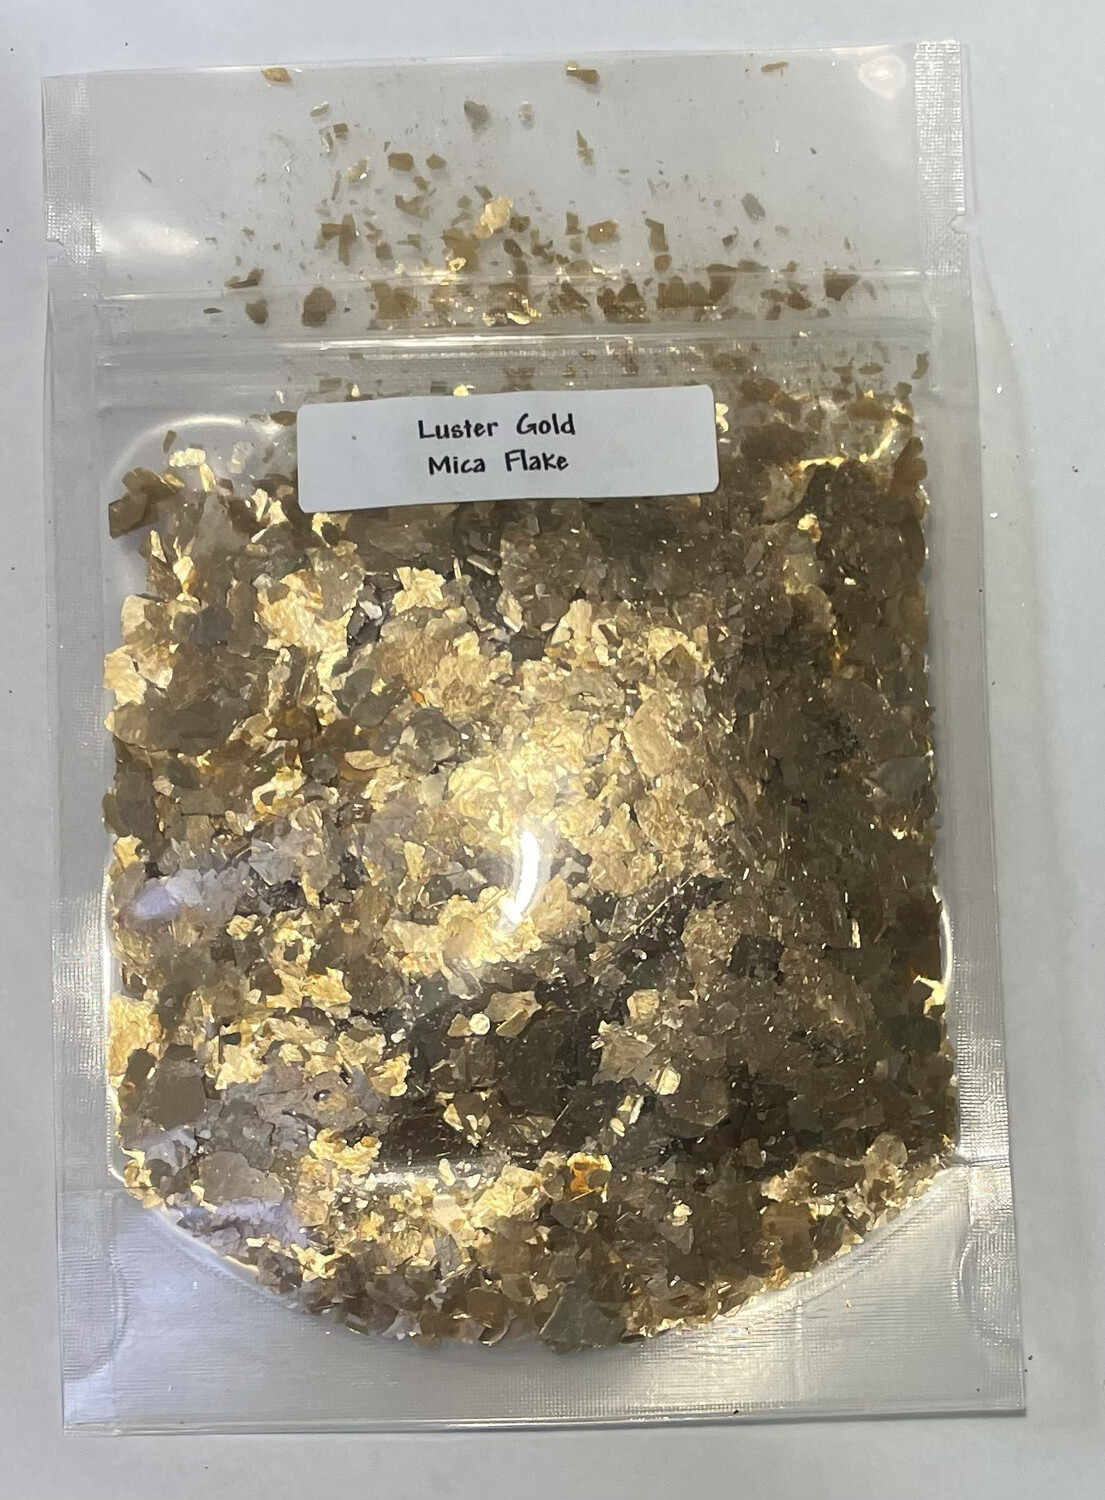 Luster Gold Mica Flake